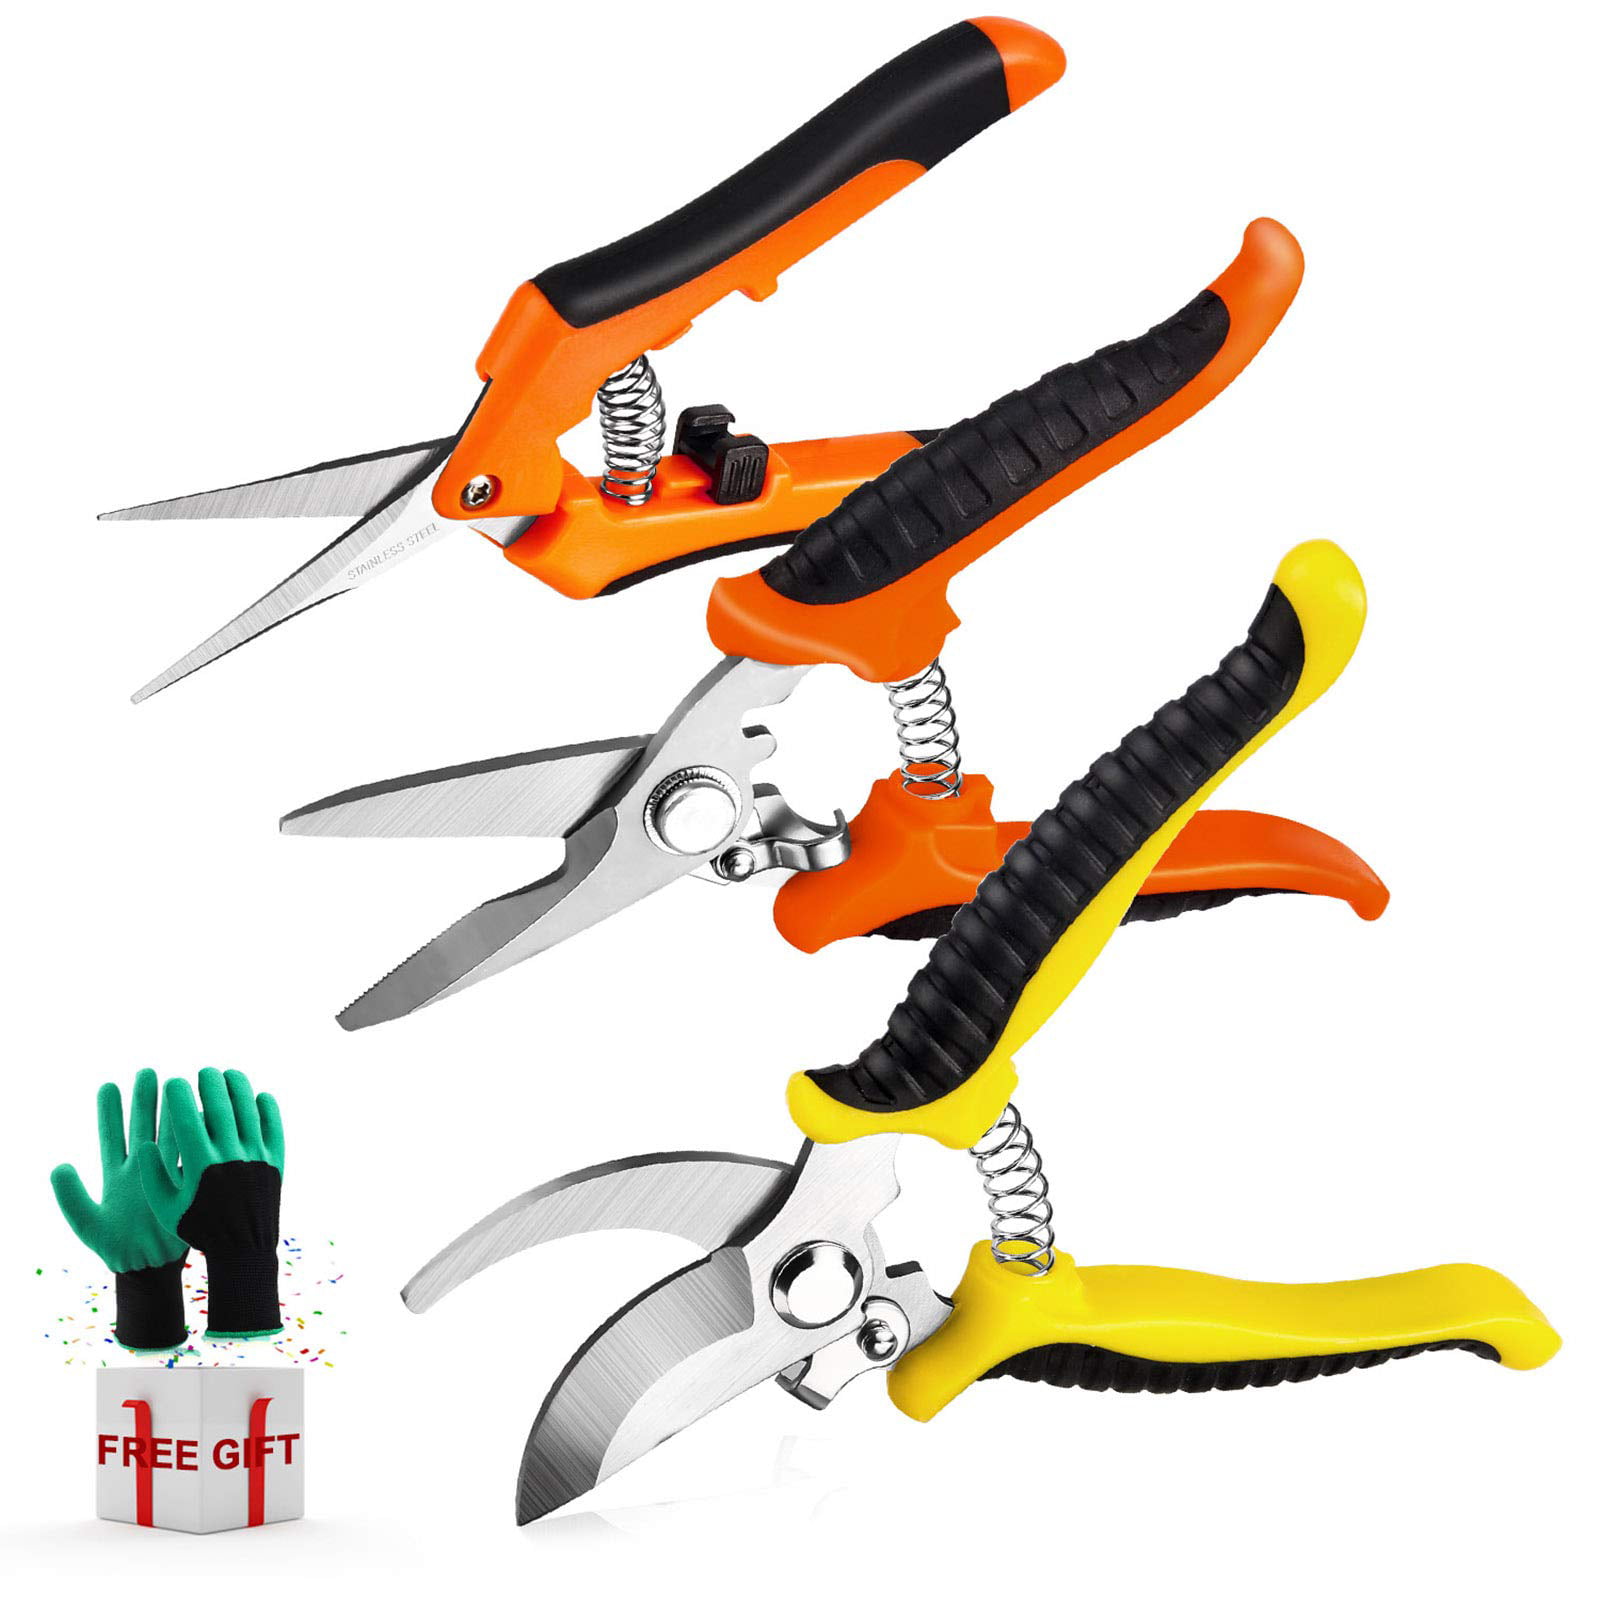 Ratchet Pruners/Secateurs FREE gifts to $35.00 Ratchet Lopper and Shears Set 